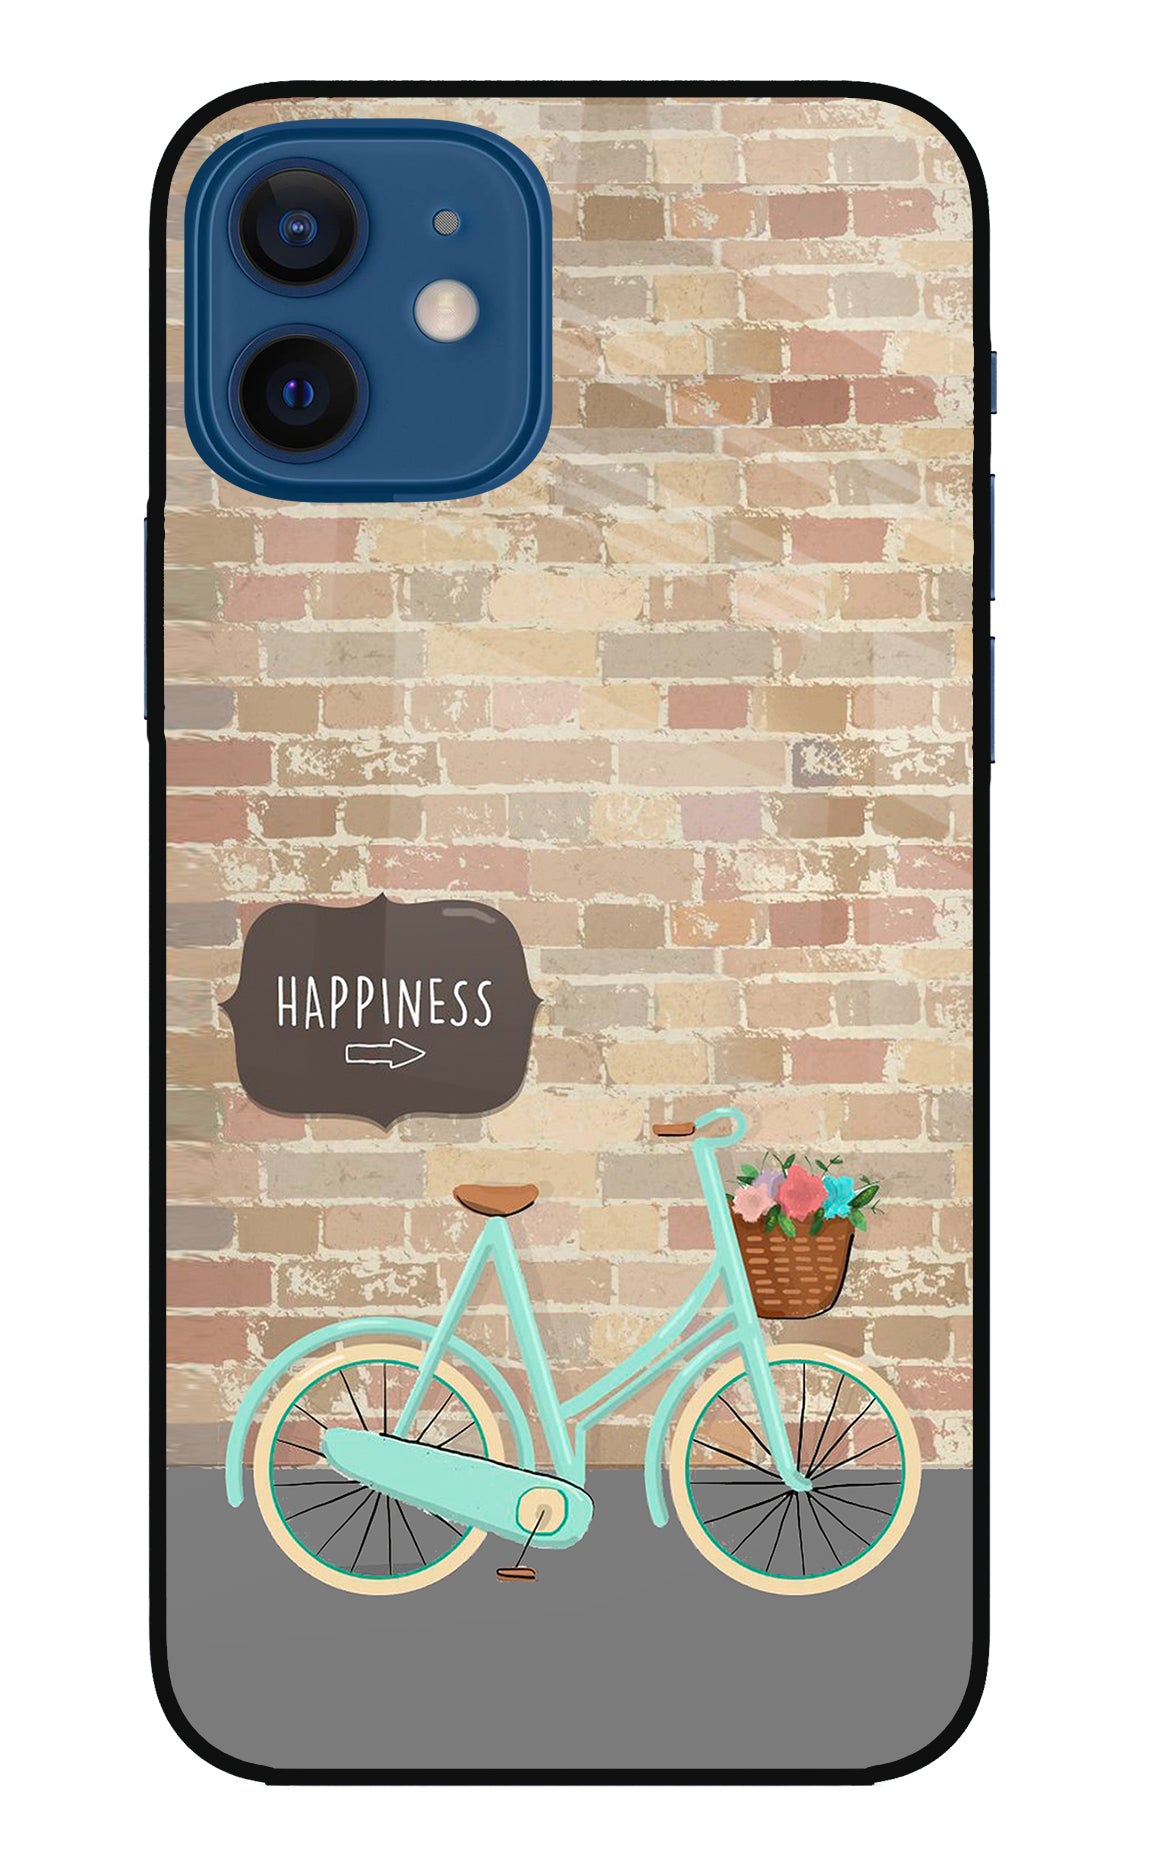 Happiness Artwork iPhone 12 Back Cover